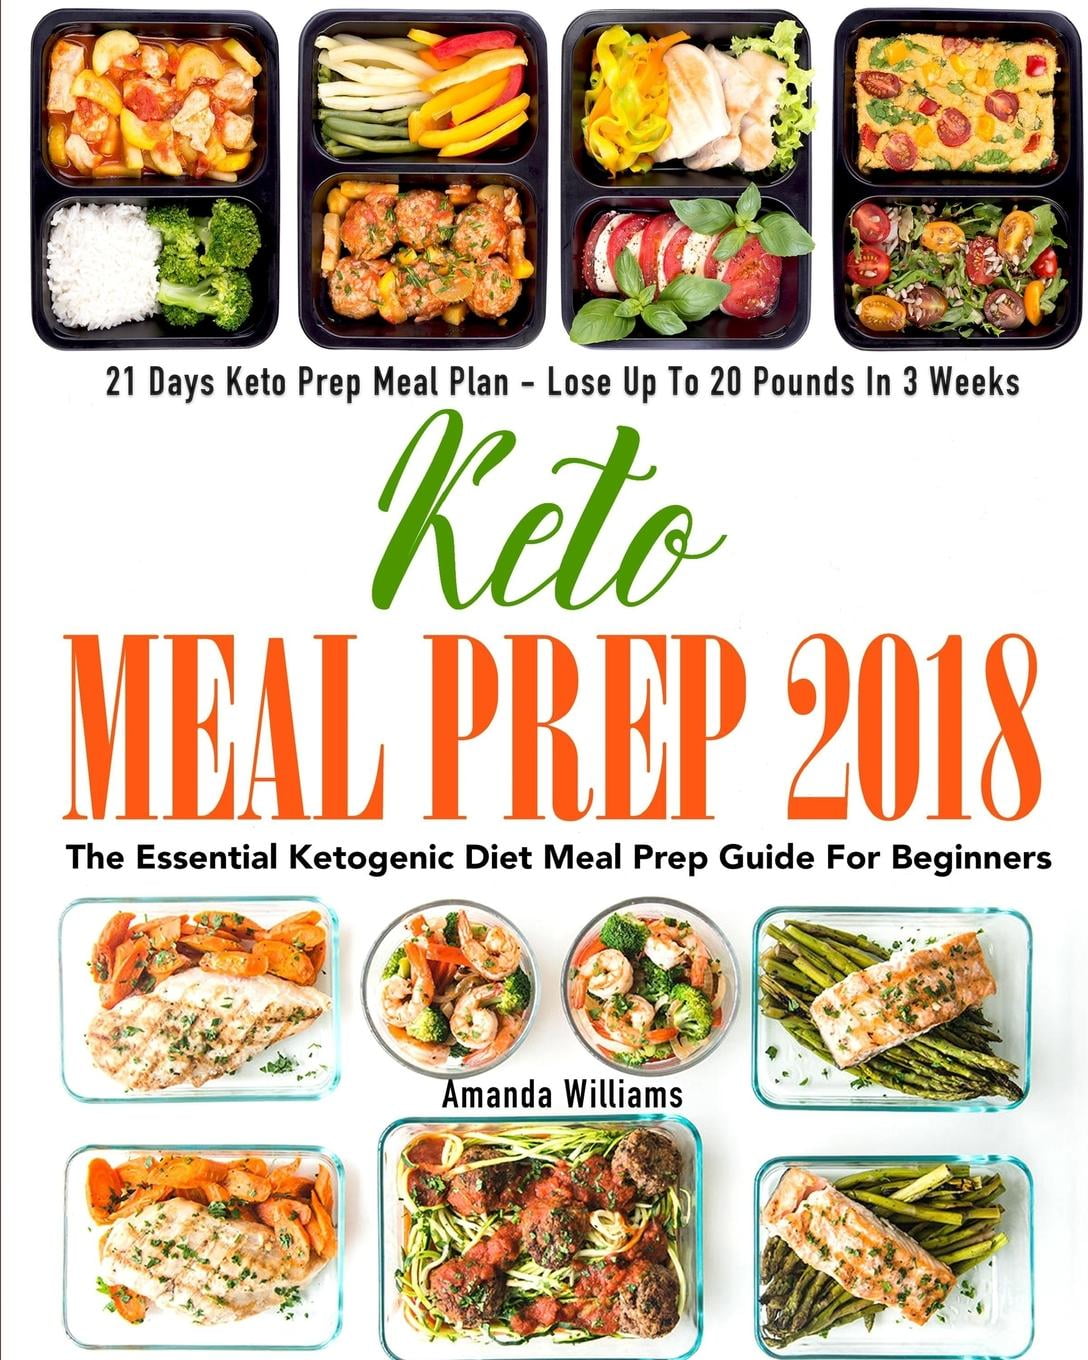 Keto Meal Prep 2018 : The Essential Ketogenic Diet Meal Prep Guide for ...